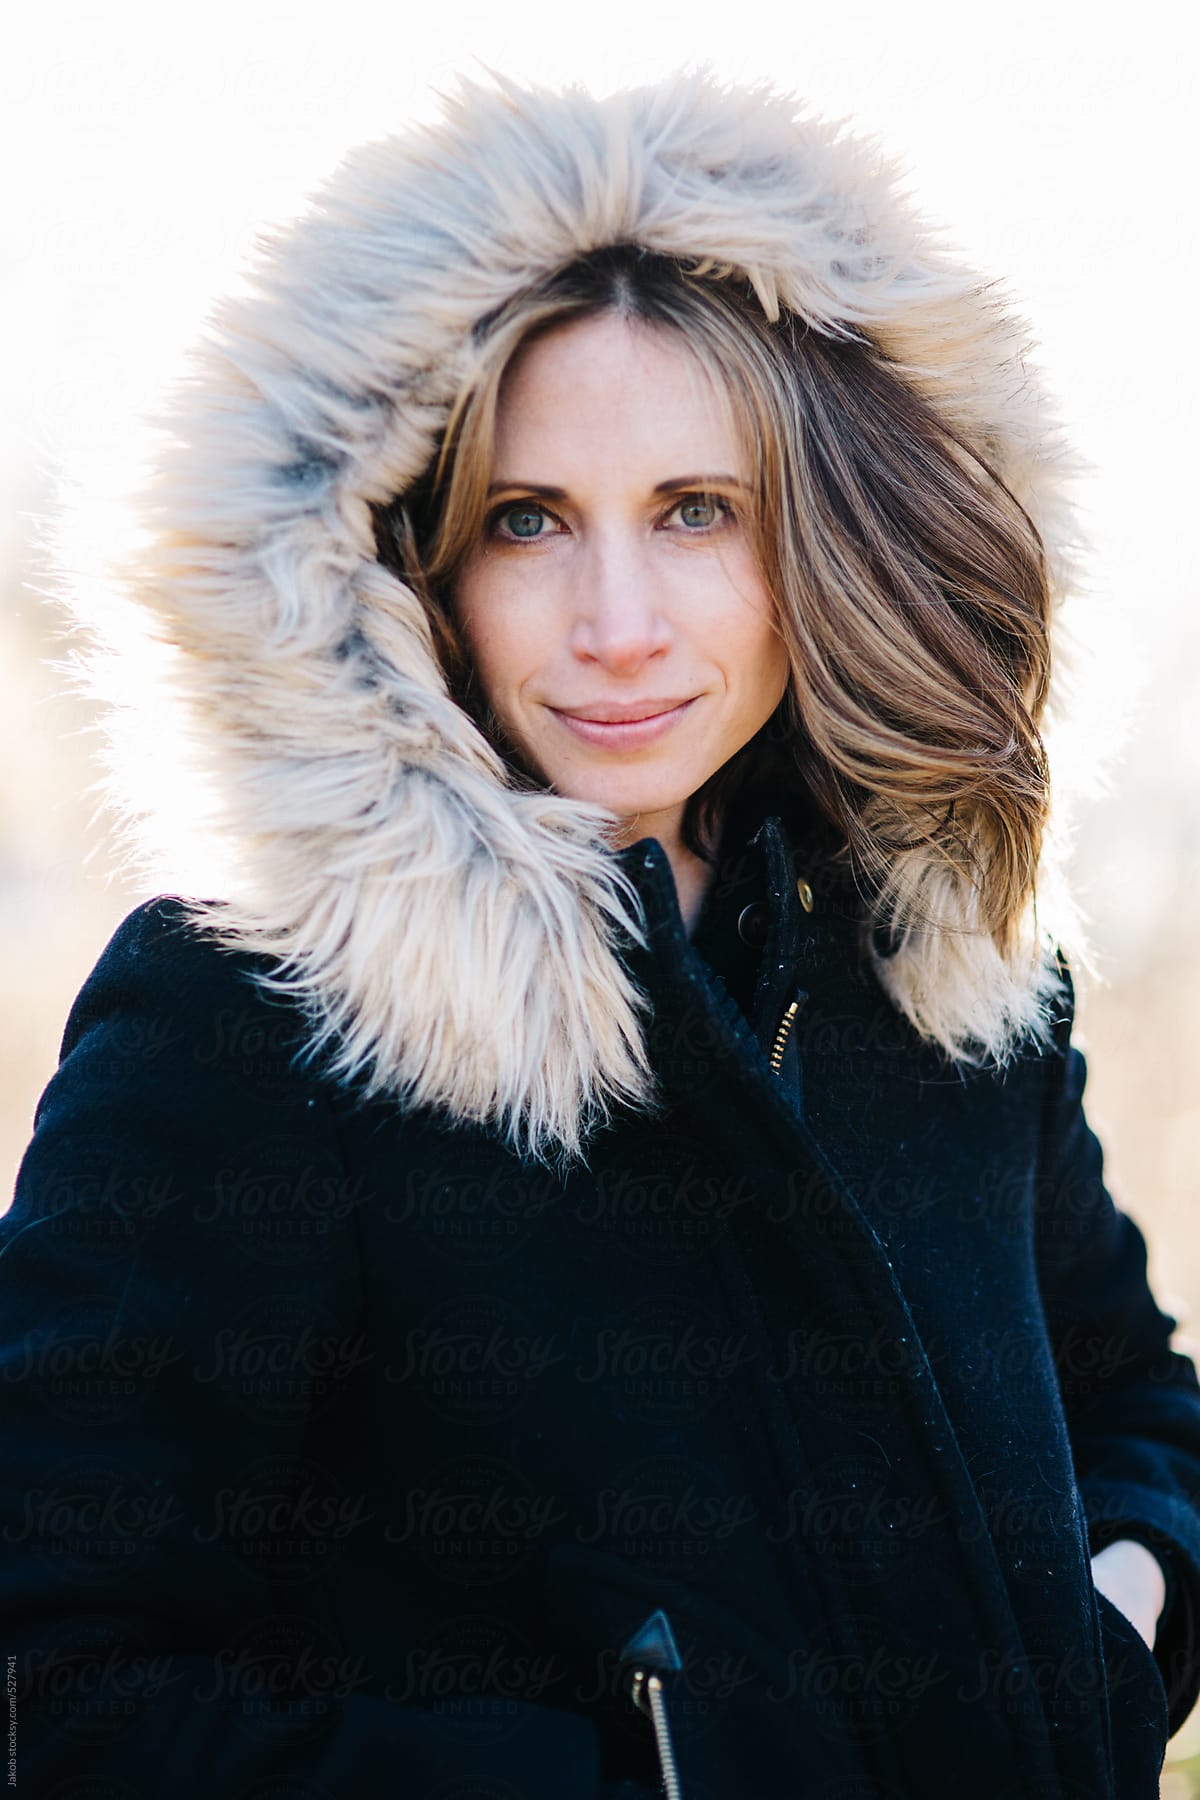 Portrait Of A Beautiful Woman With A Fur Trim Hood Over Her Head By Stocksy Contributor Jakob 